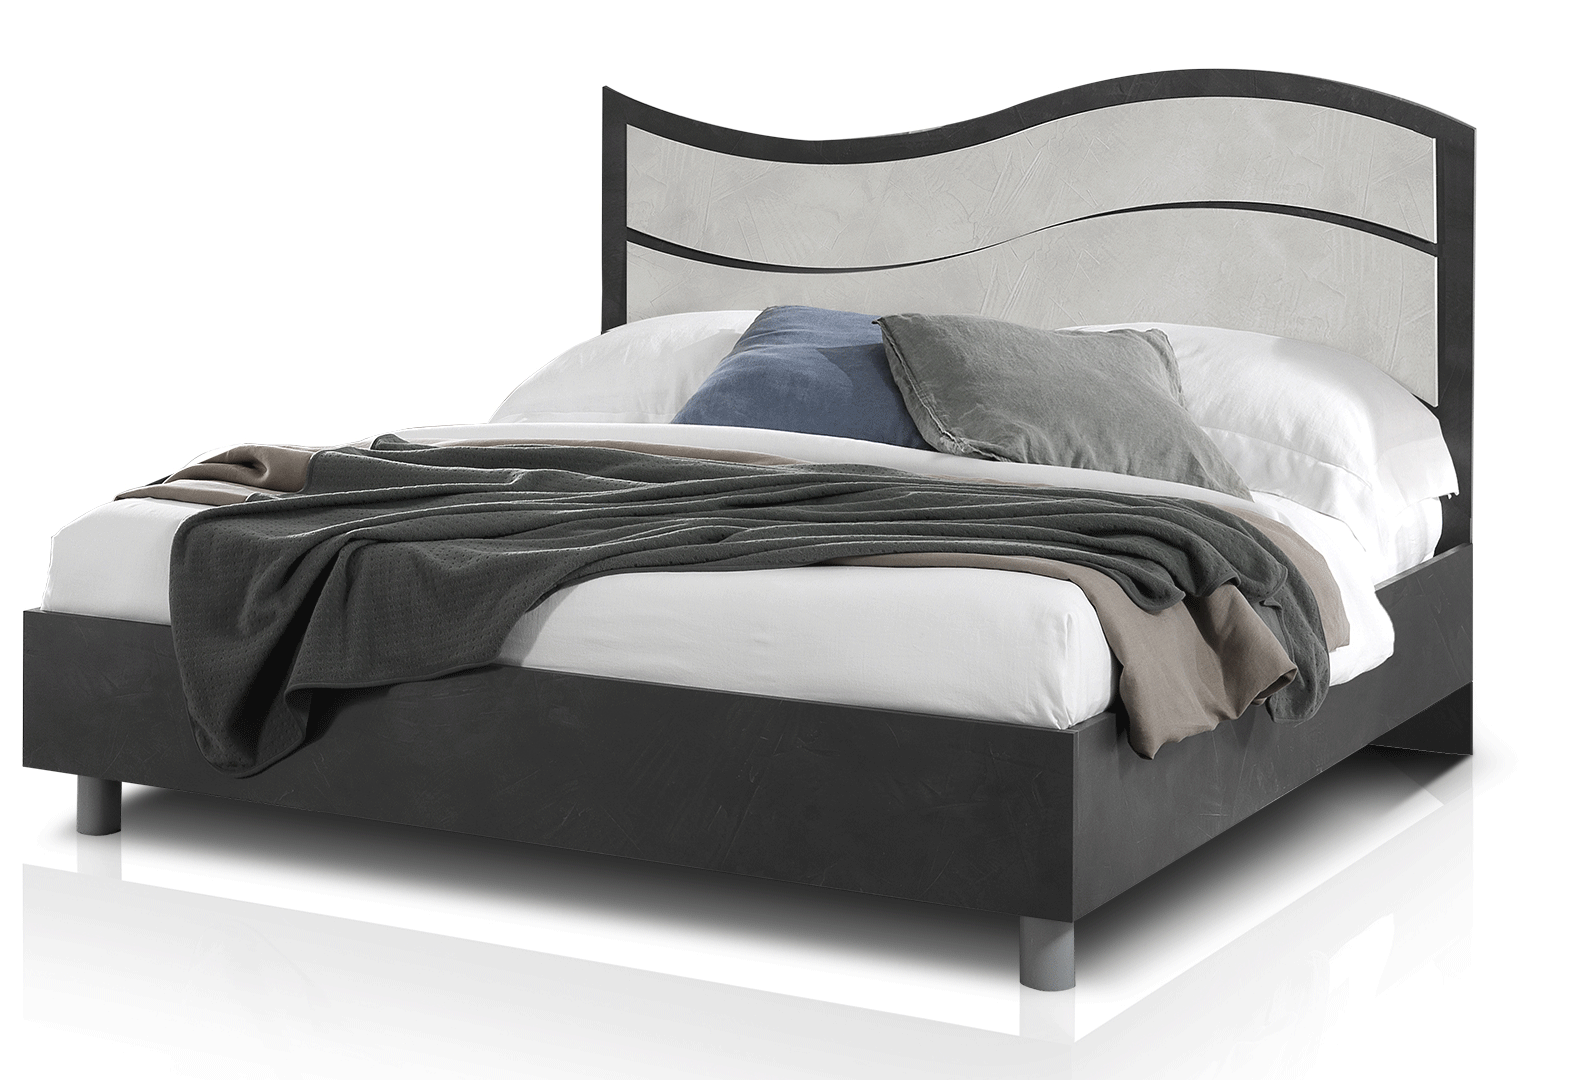 Brands Status Modern Collections, Italy Ischia Bed